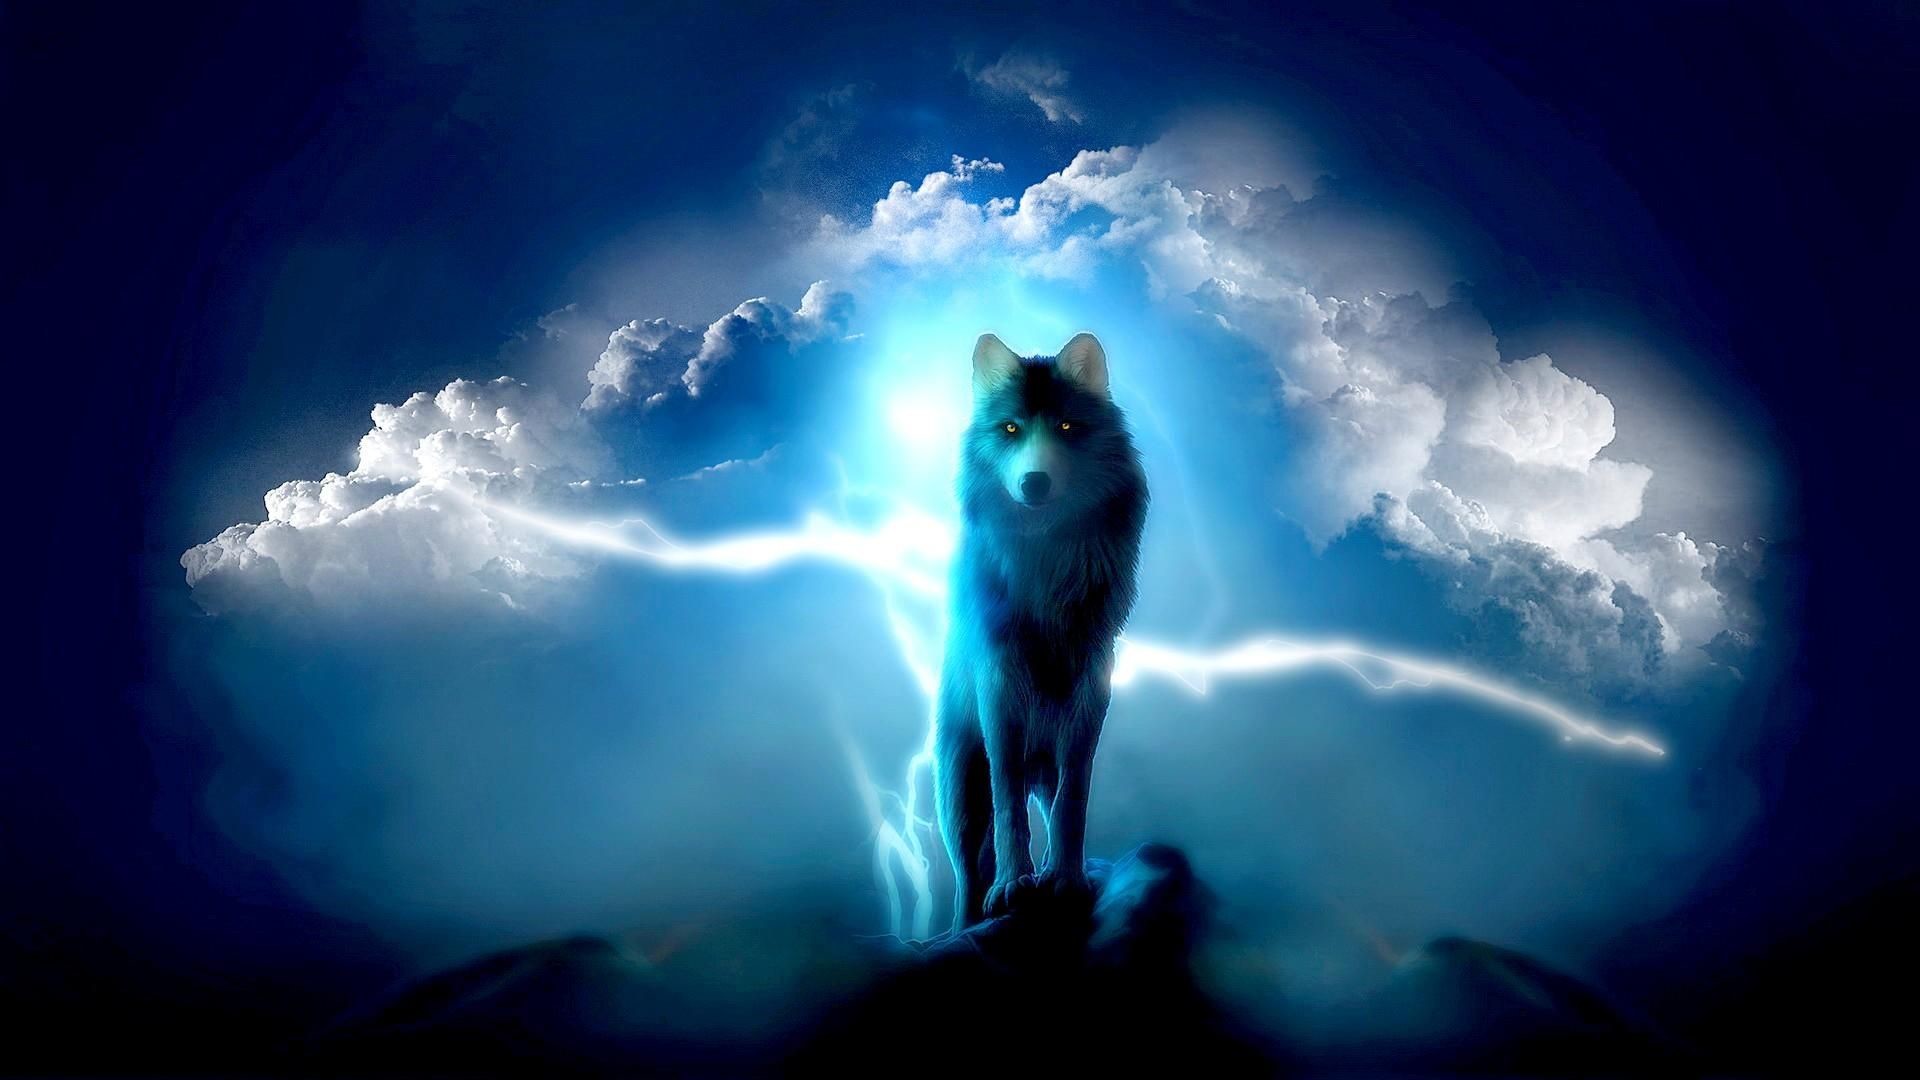 Blue Flame Wolf Wallpaper (75+ images)